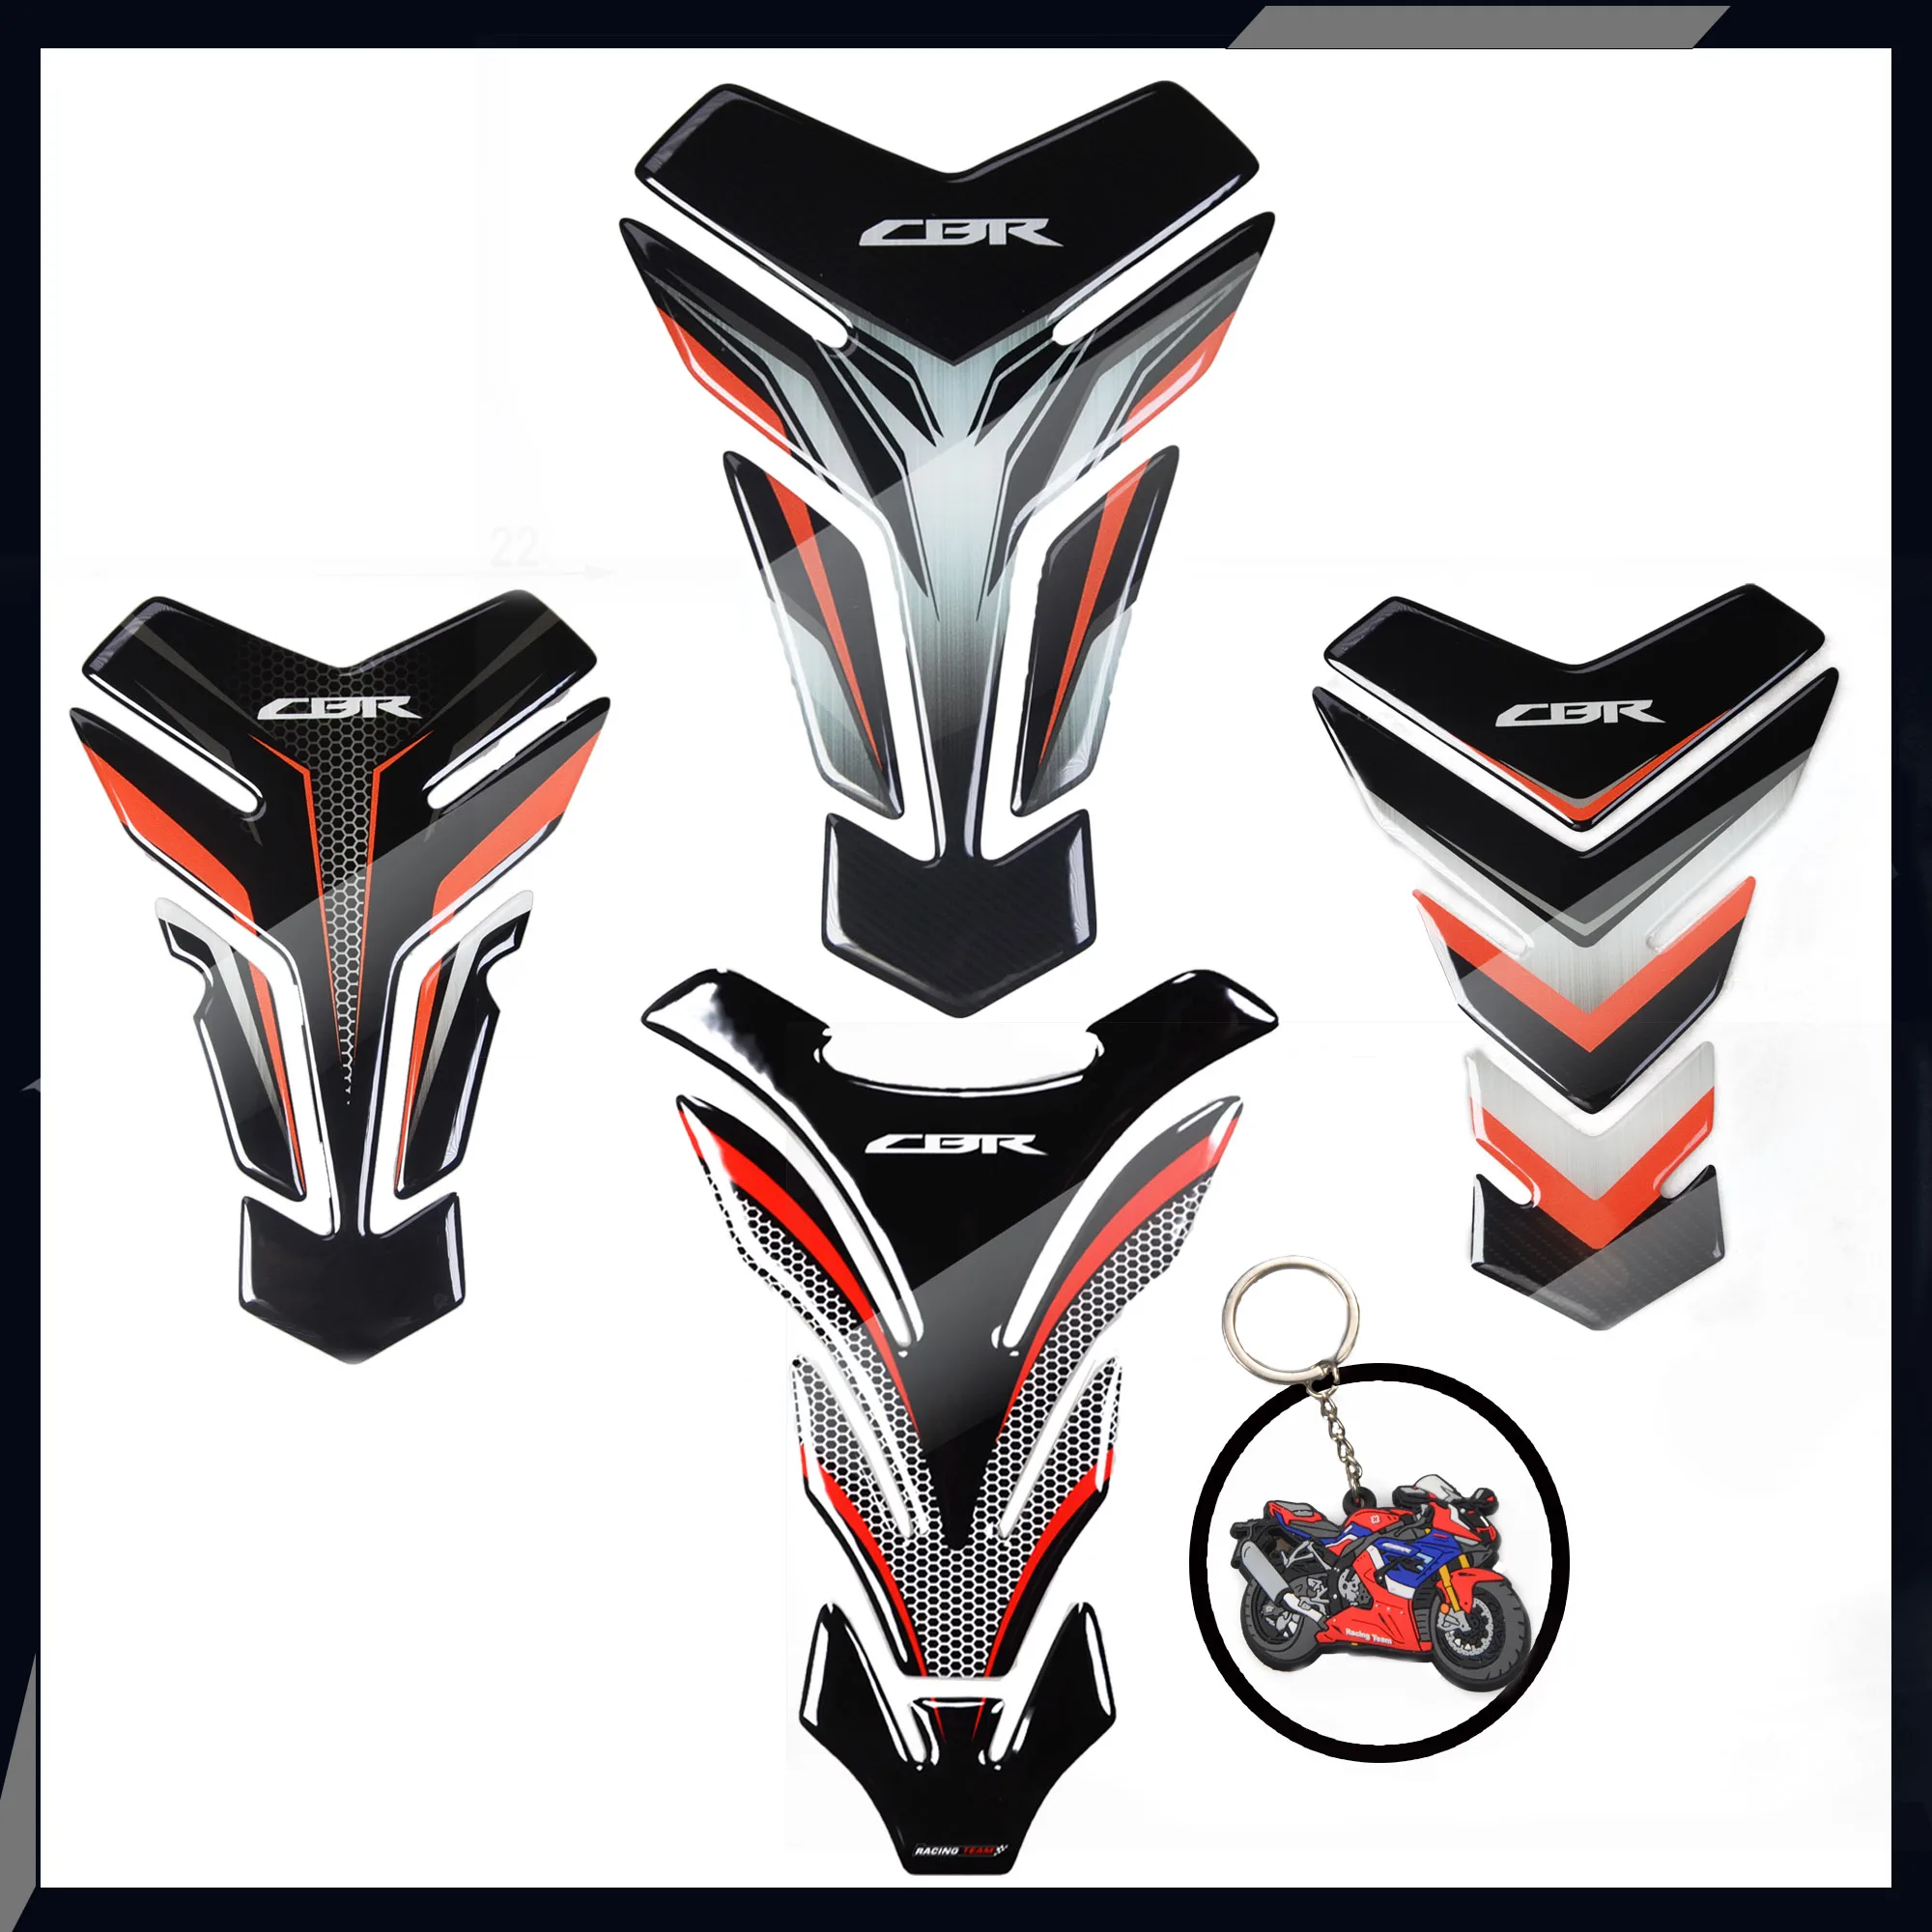 

Recrist 3D Motorcycle Stickers Tank Pad Protector For CBR Tankpad CBR500 CBR600RR CBR900RR CBR1000RR CBR250 CBR300